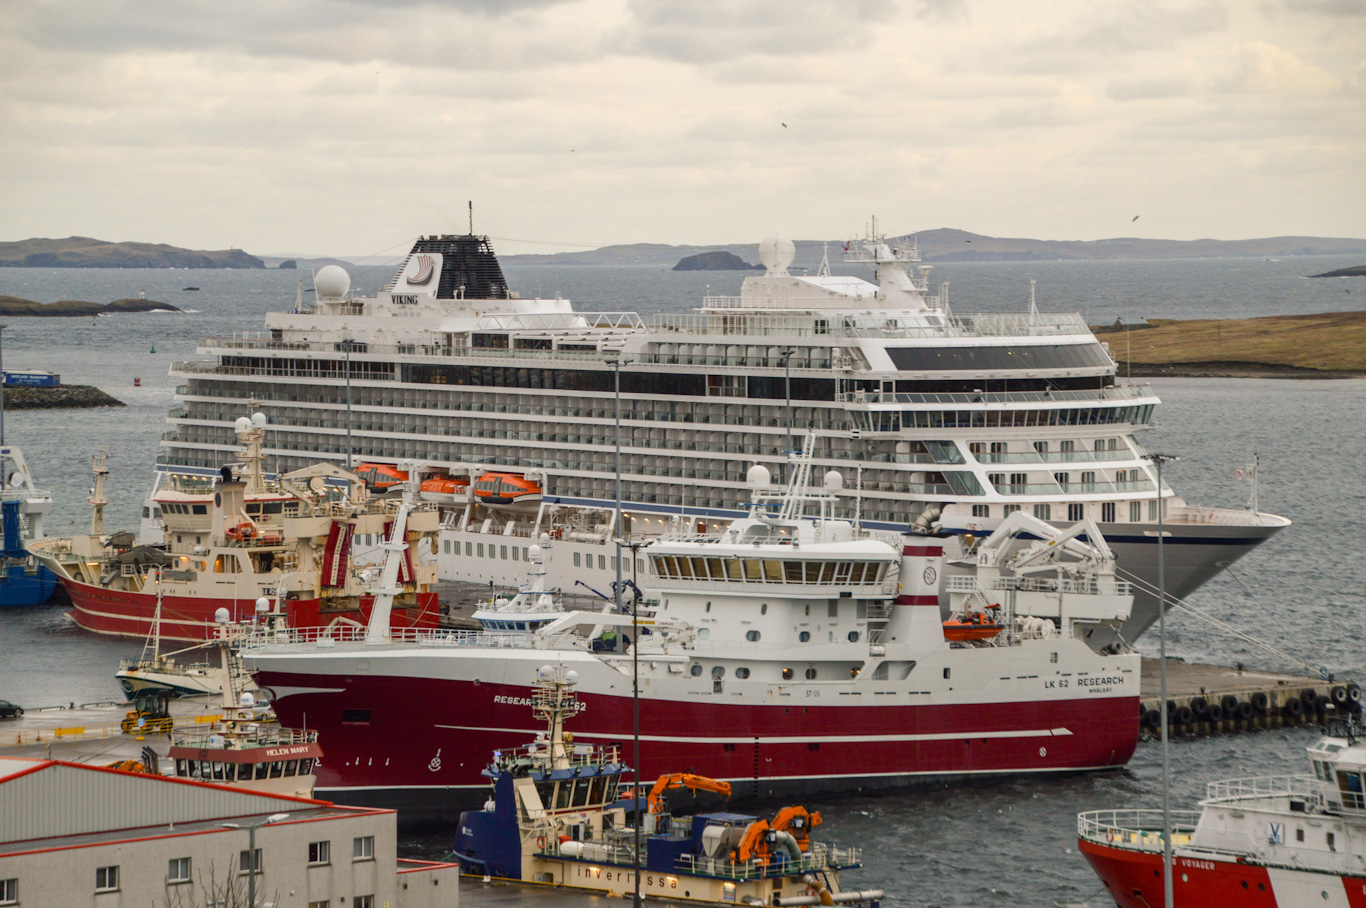 Viking Venus today (Wednesday 6 April, 2022) became the first cruise ship of the year to visit Lerwick in what is expected to be a record season at the Shetland port (April 2022)